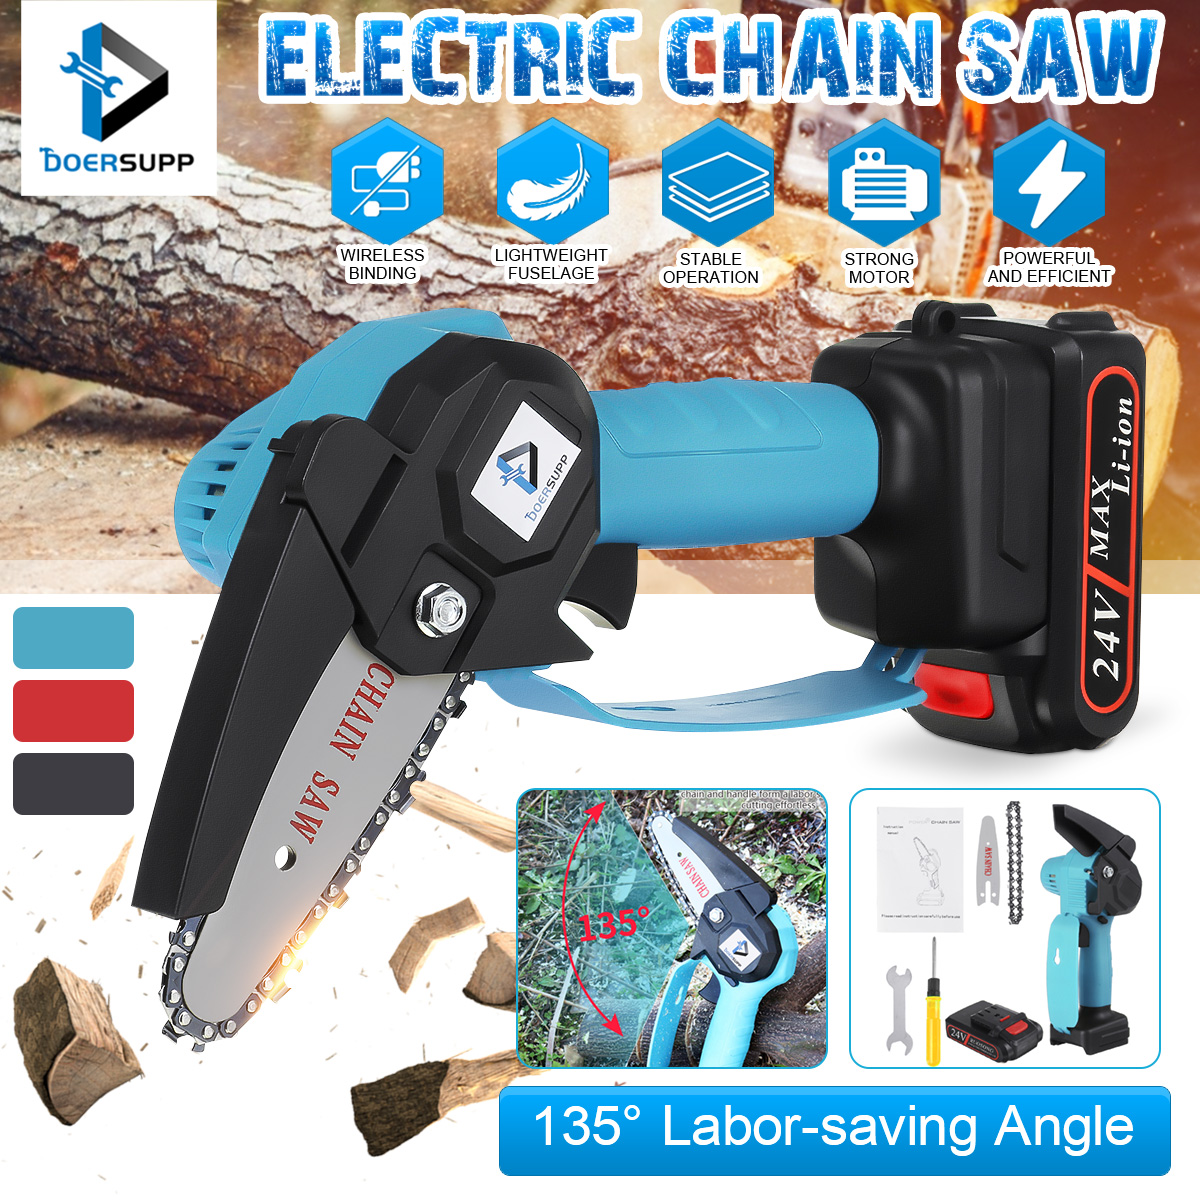 1000W-4Inch-Cordless-Electric-Chain-Saw-Wood-Mini-Cutter-One-Hand-Saw-Woodworking-Tool-W-None1pc-Bat-1833244-1